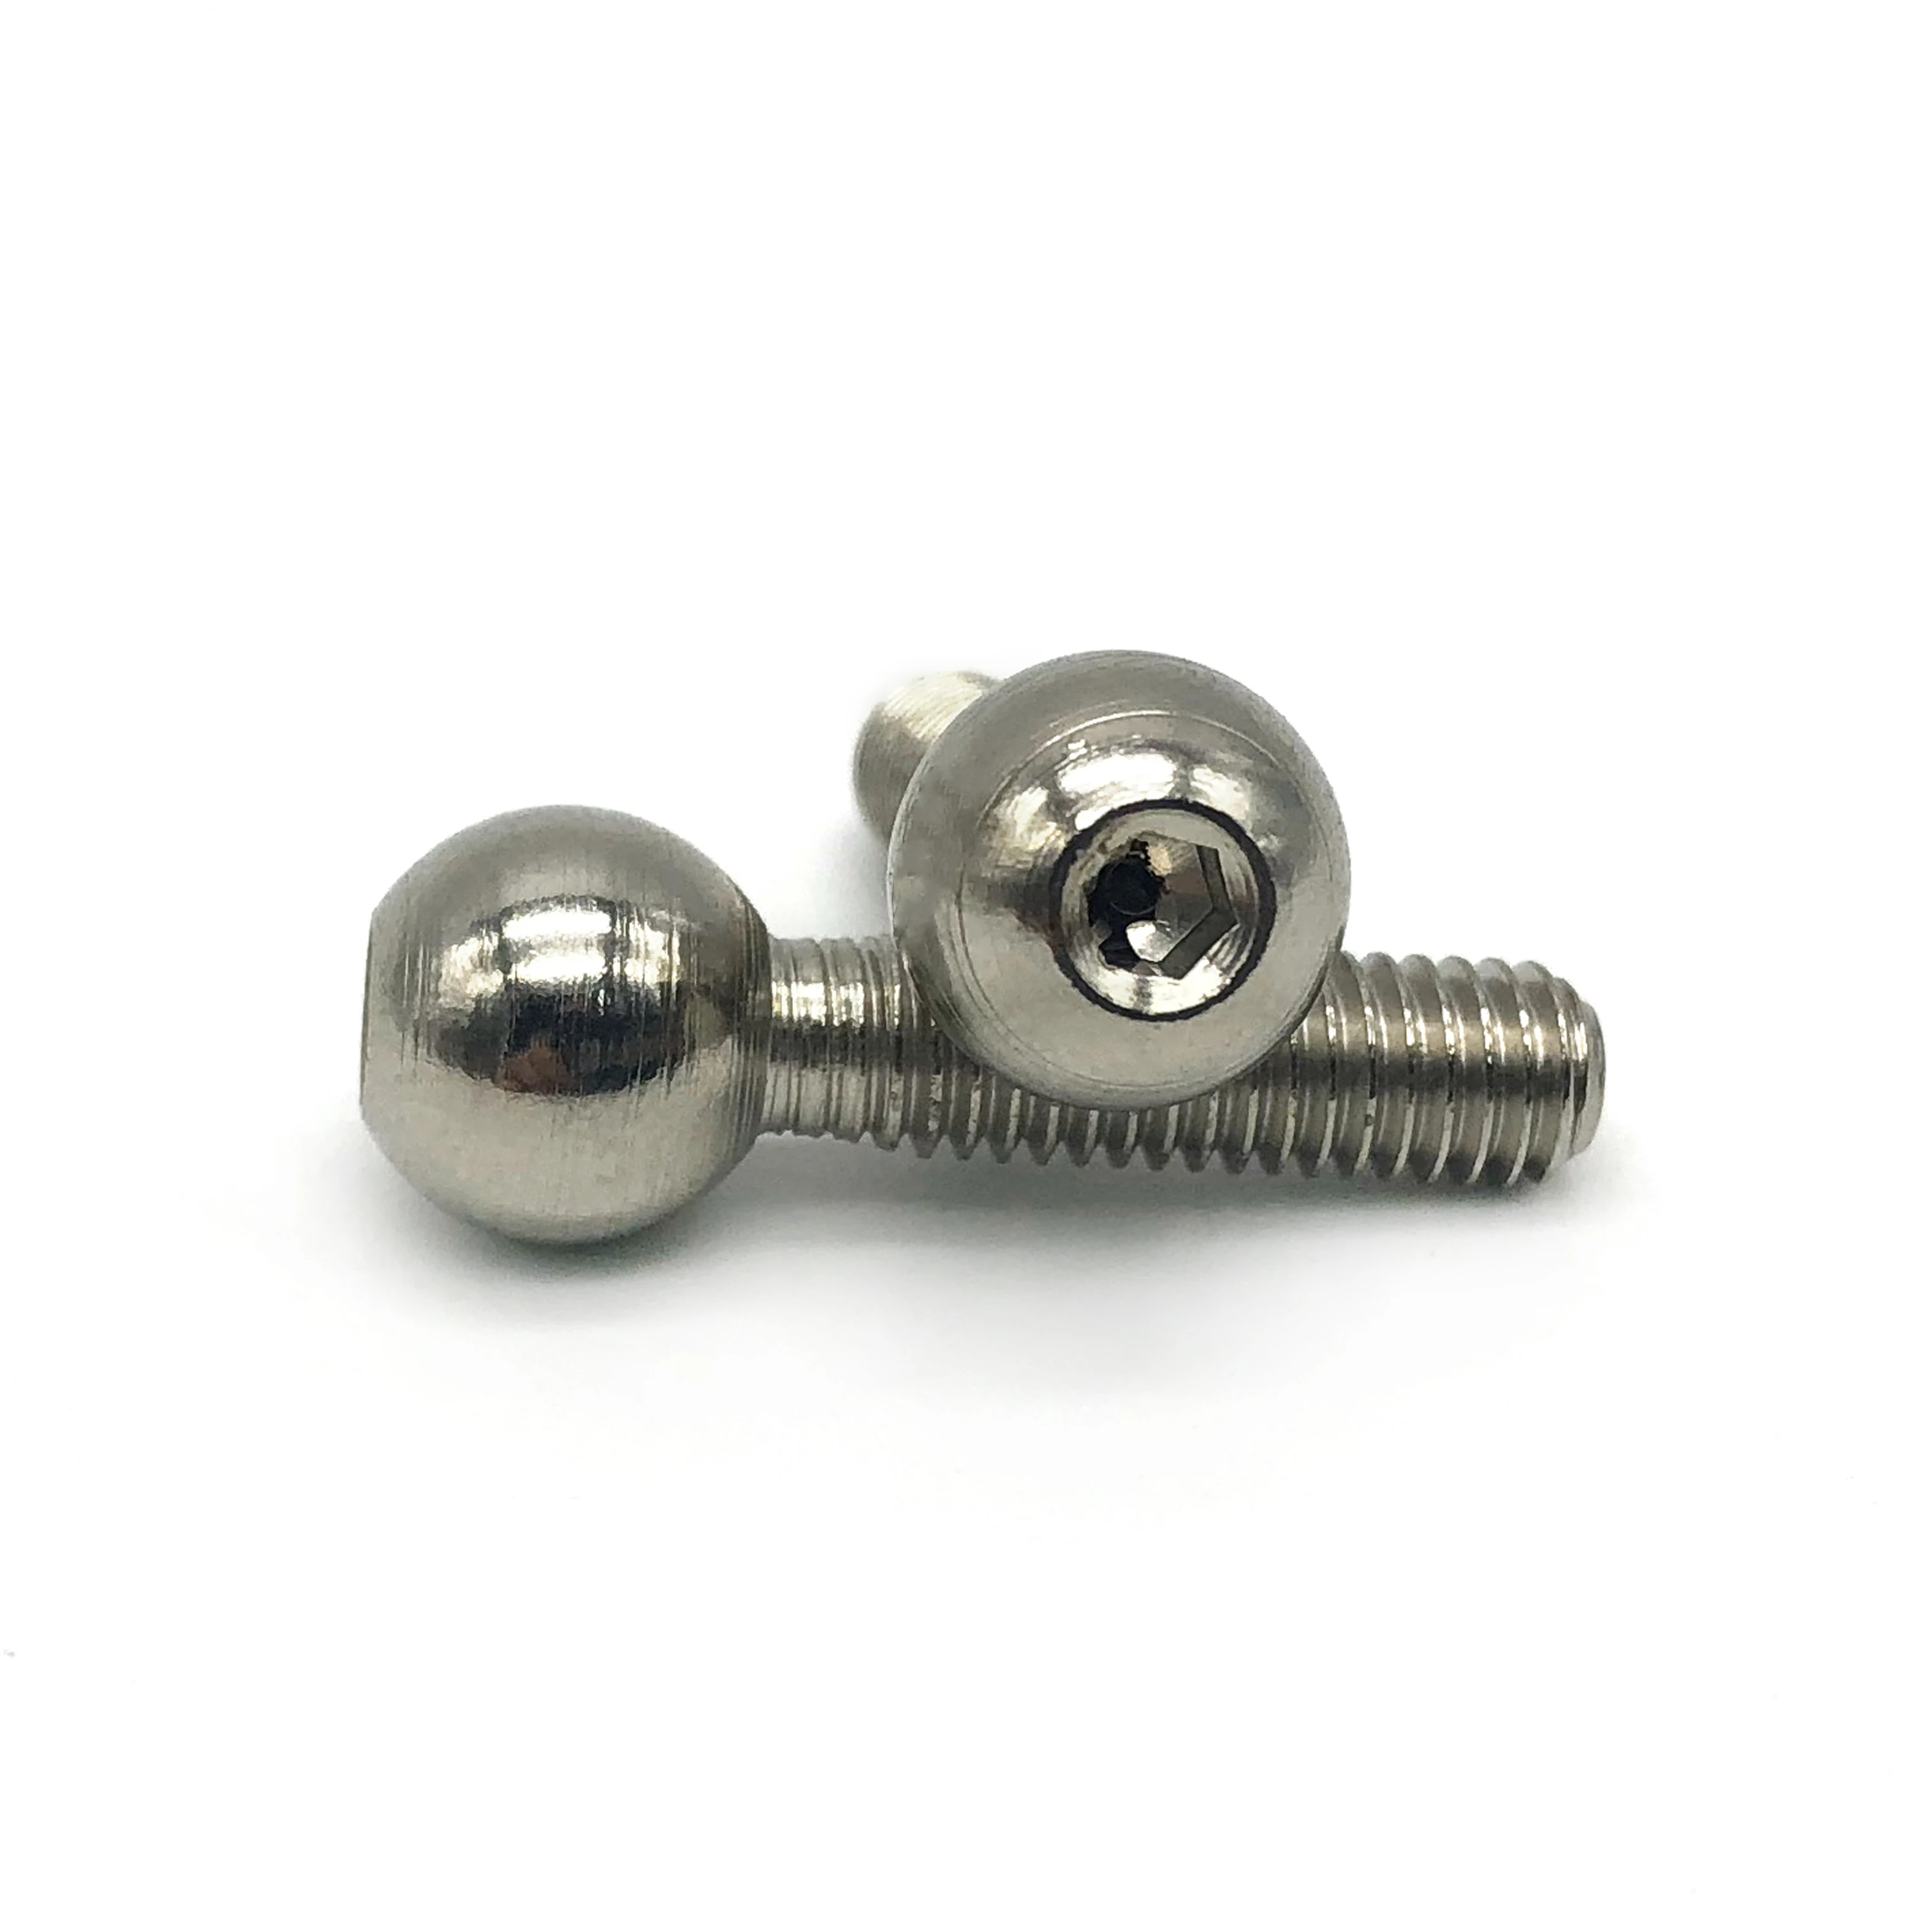 China wholesale stainless steel threaded studs 1/4 inch m3 m6 M4 M5 M8 metal round ball head screw